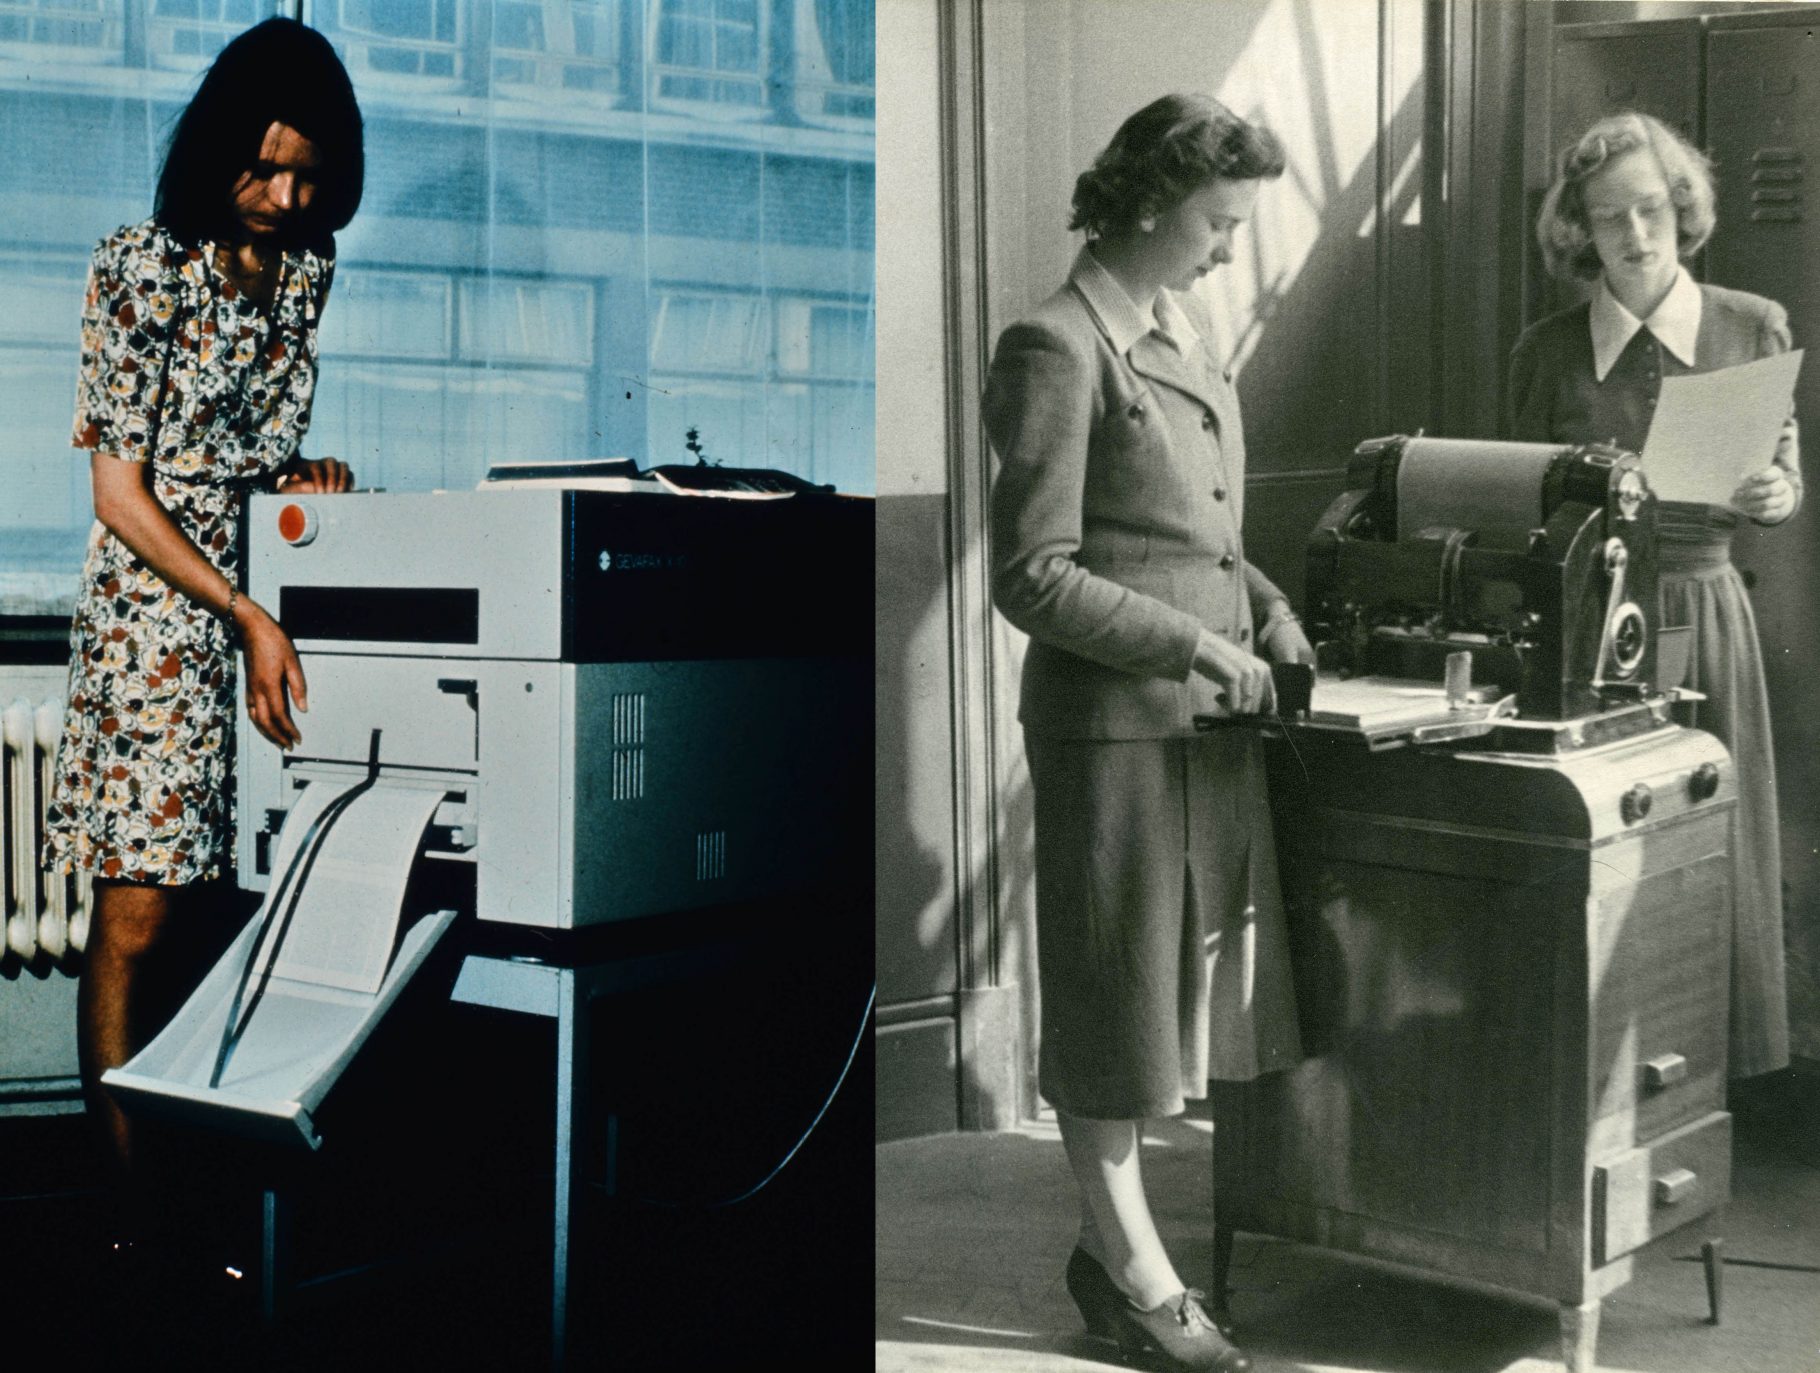 Composite image, right half in black and white showing two women in pencil skirts using an old-fashioned machine, left half is a colour image showing a women in a dress using a photocopier